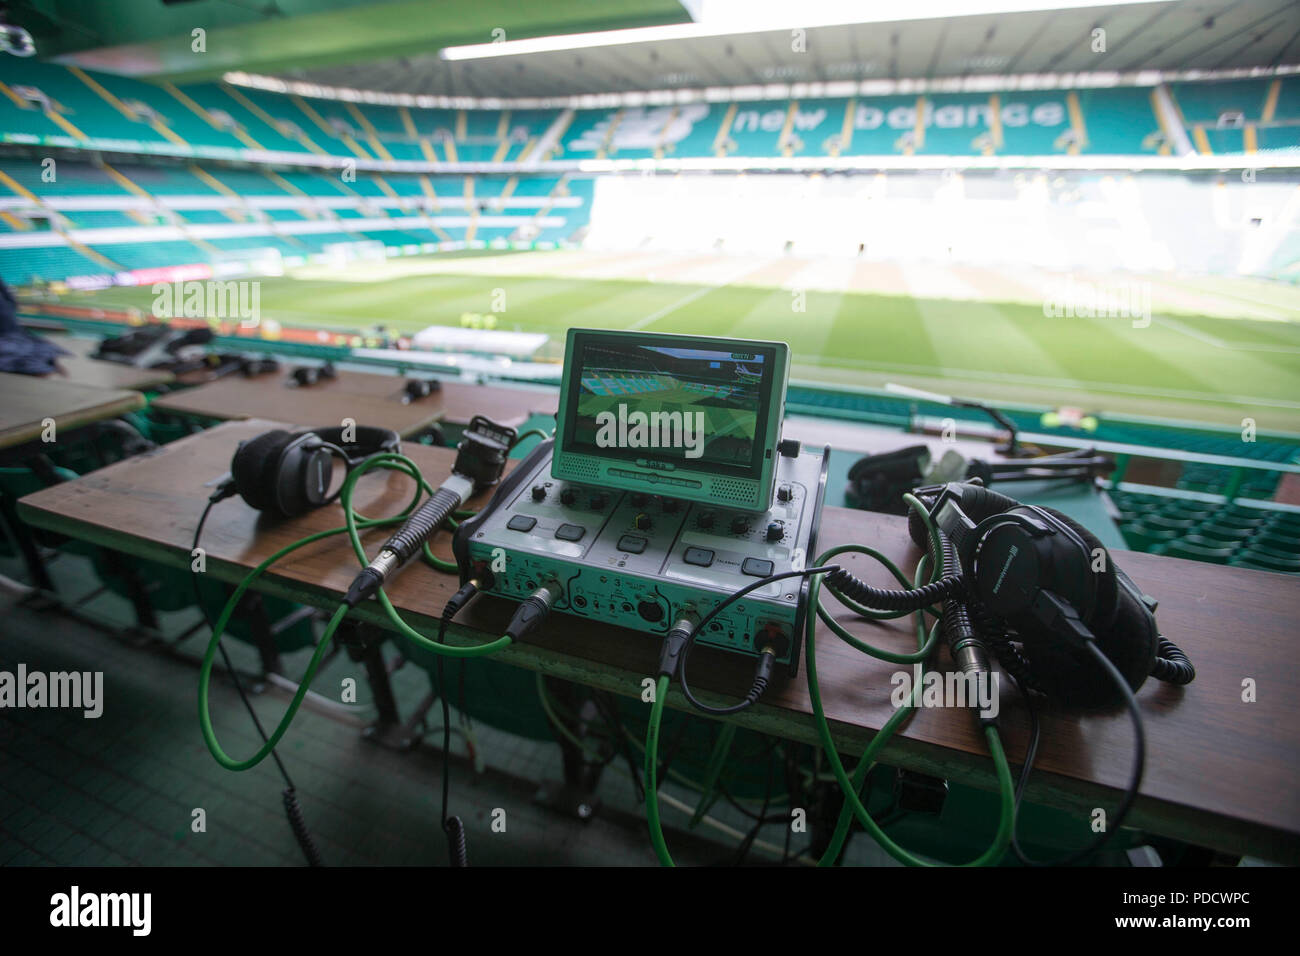 Commentary Box High Resolution Stock Photography and Images - Alamy